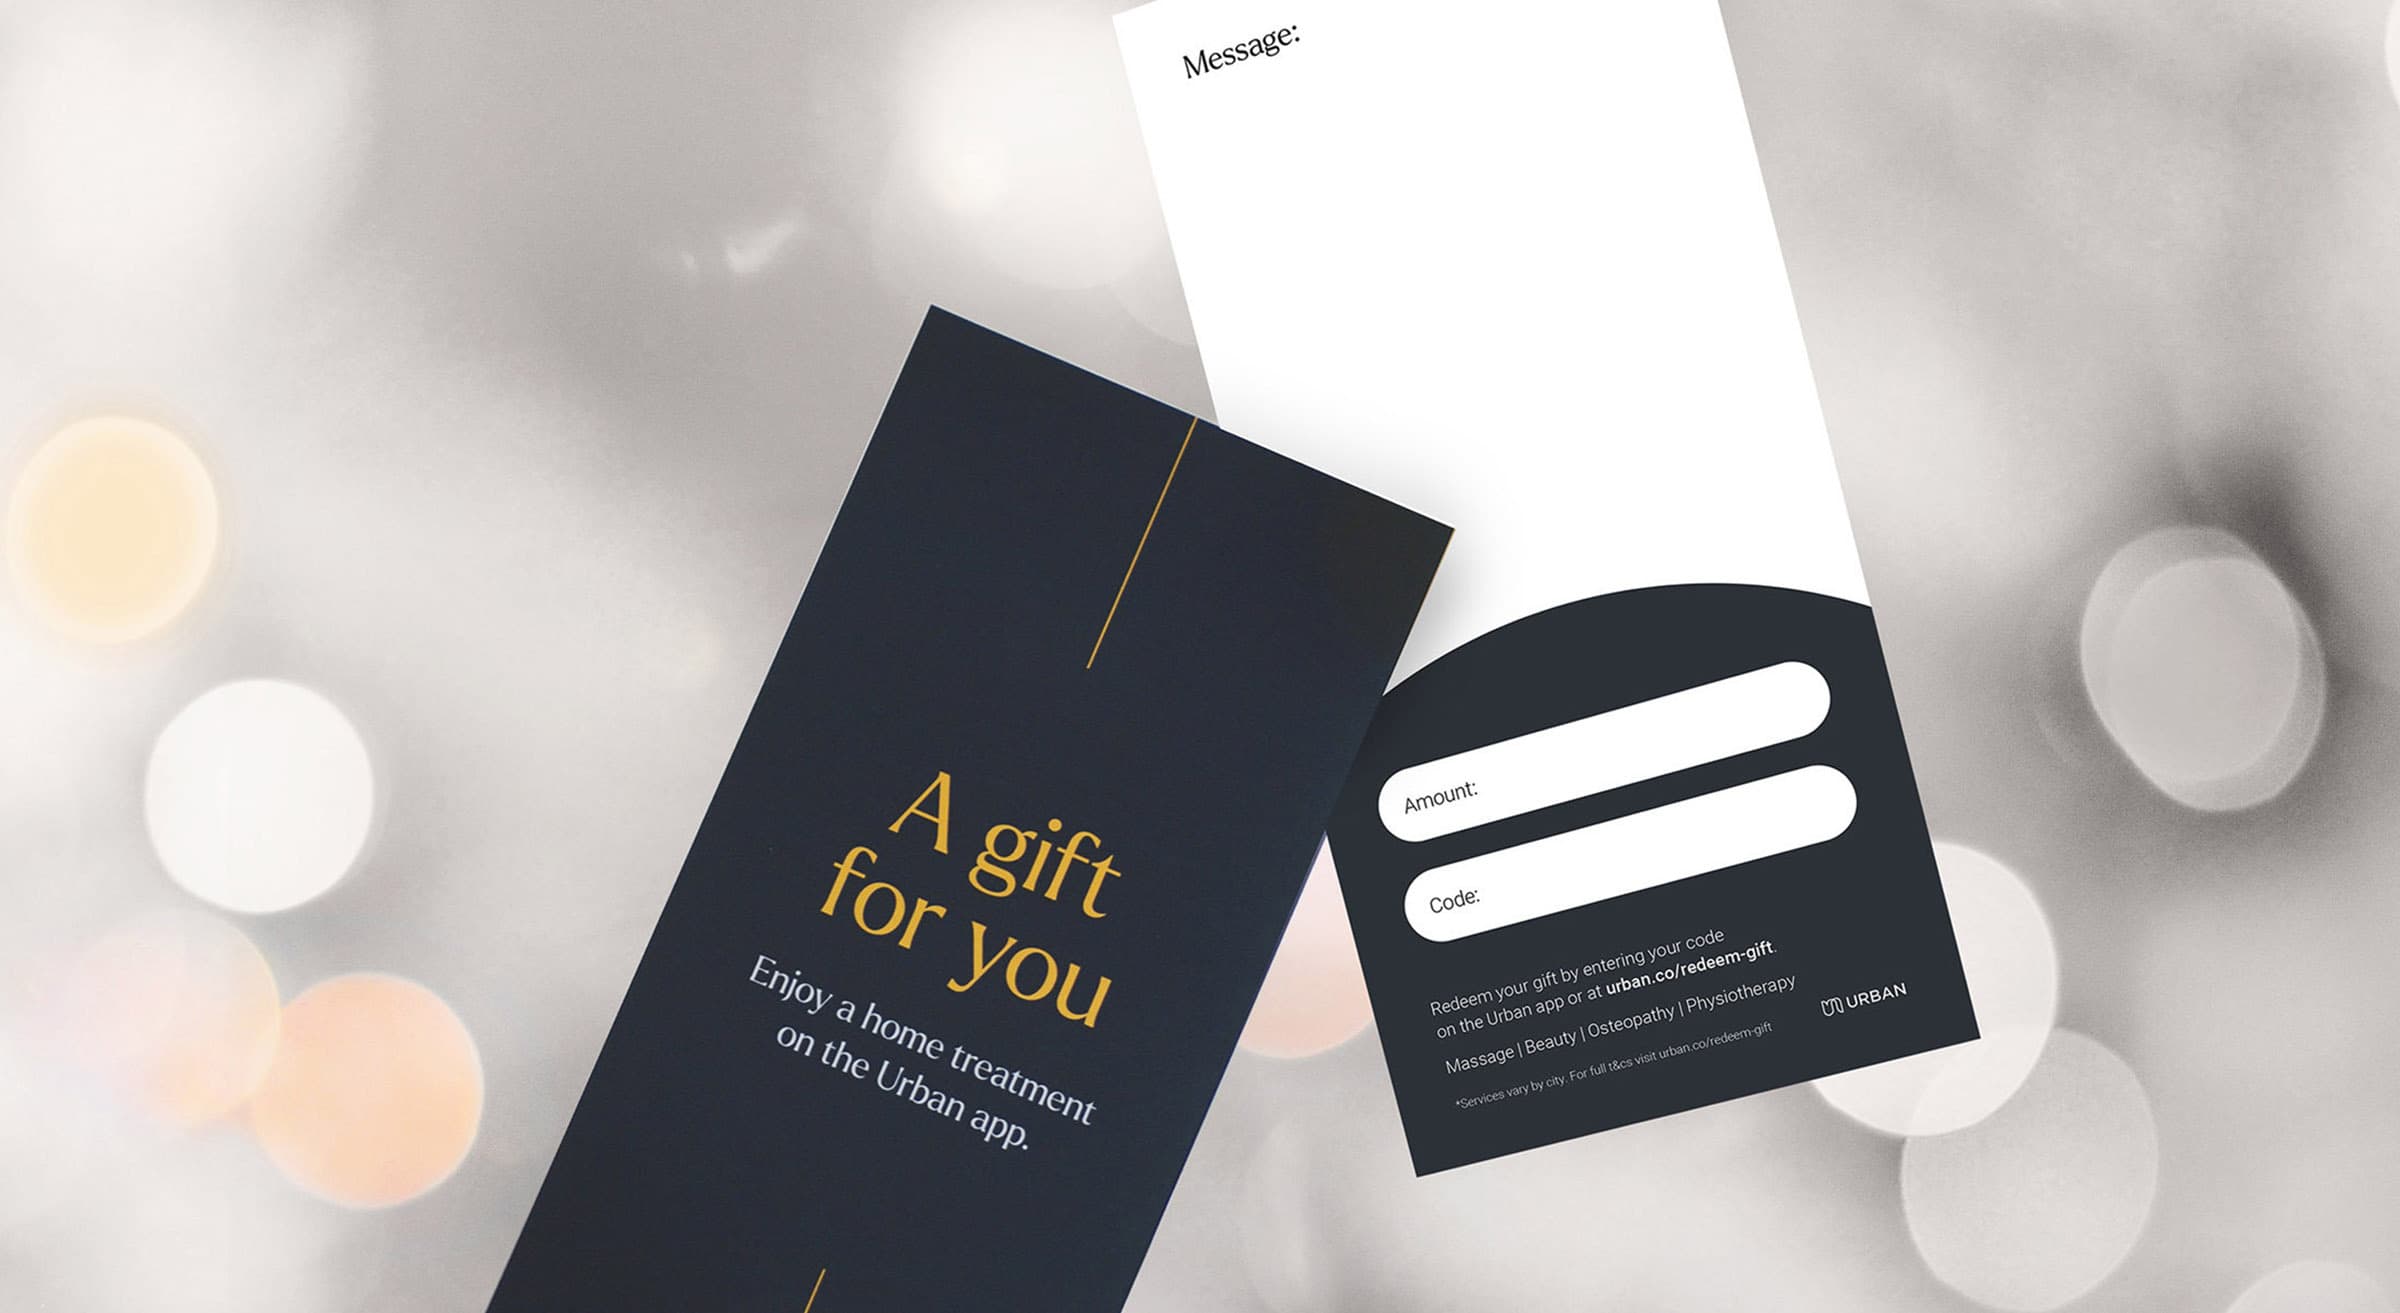 Gift card that reads "A gift for you, enjoy a home treatment on the Urban app"